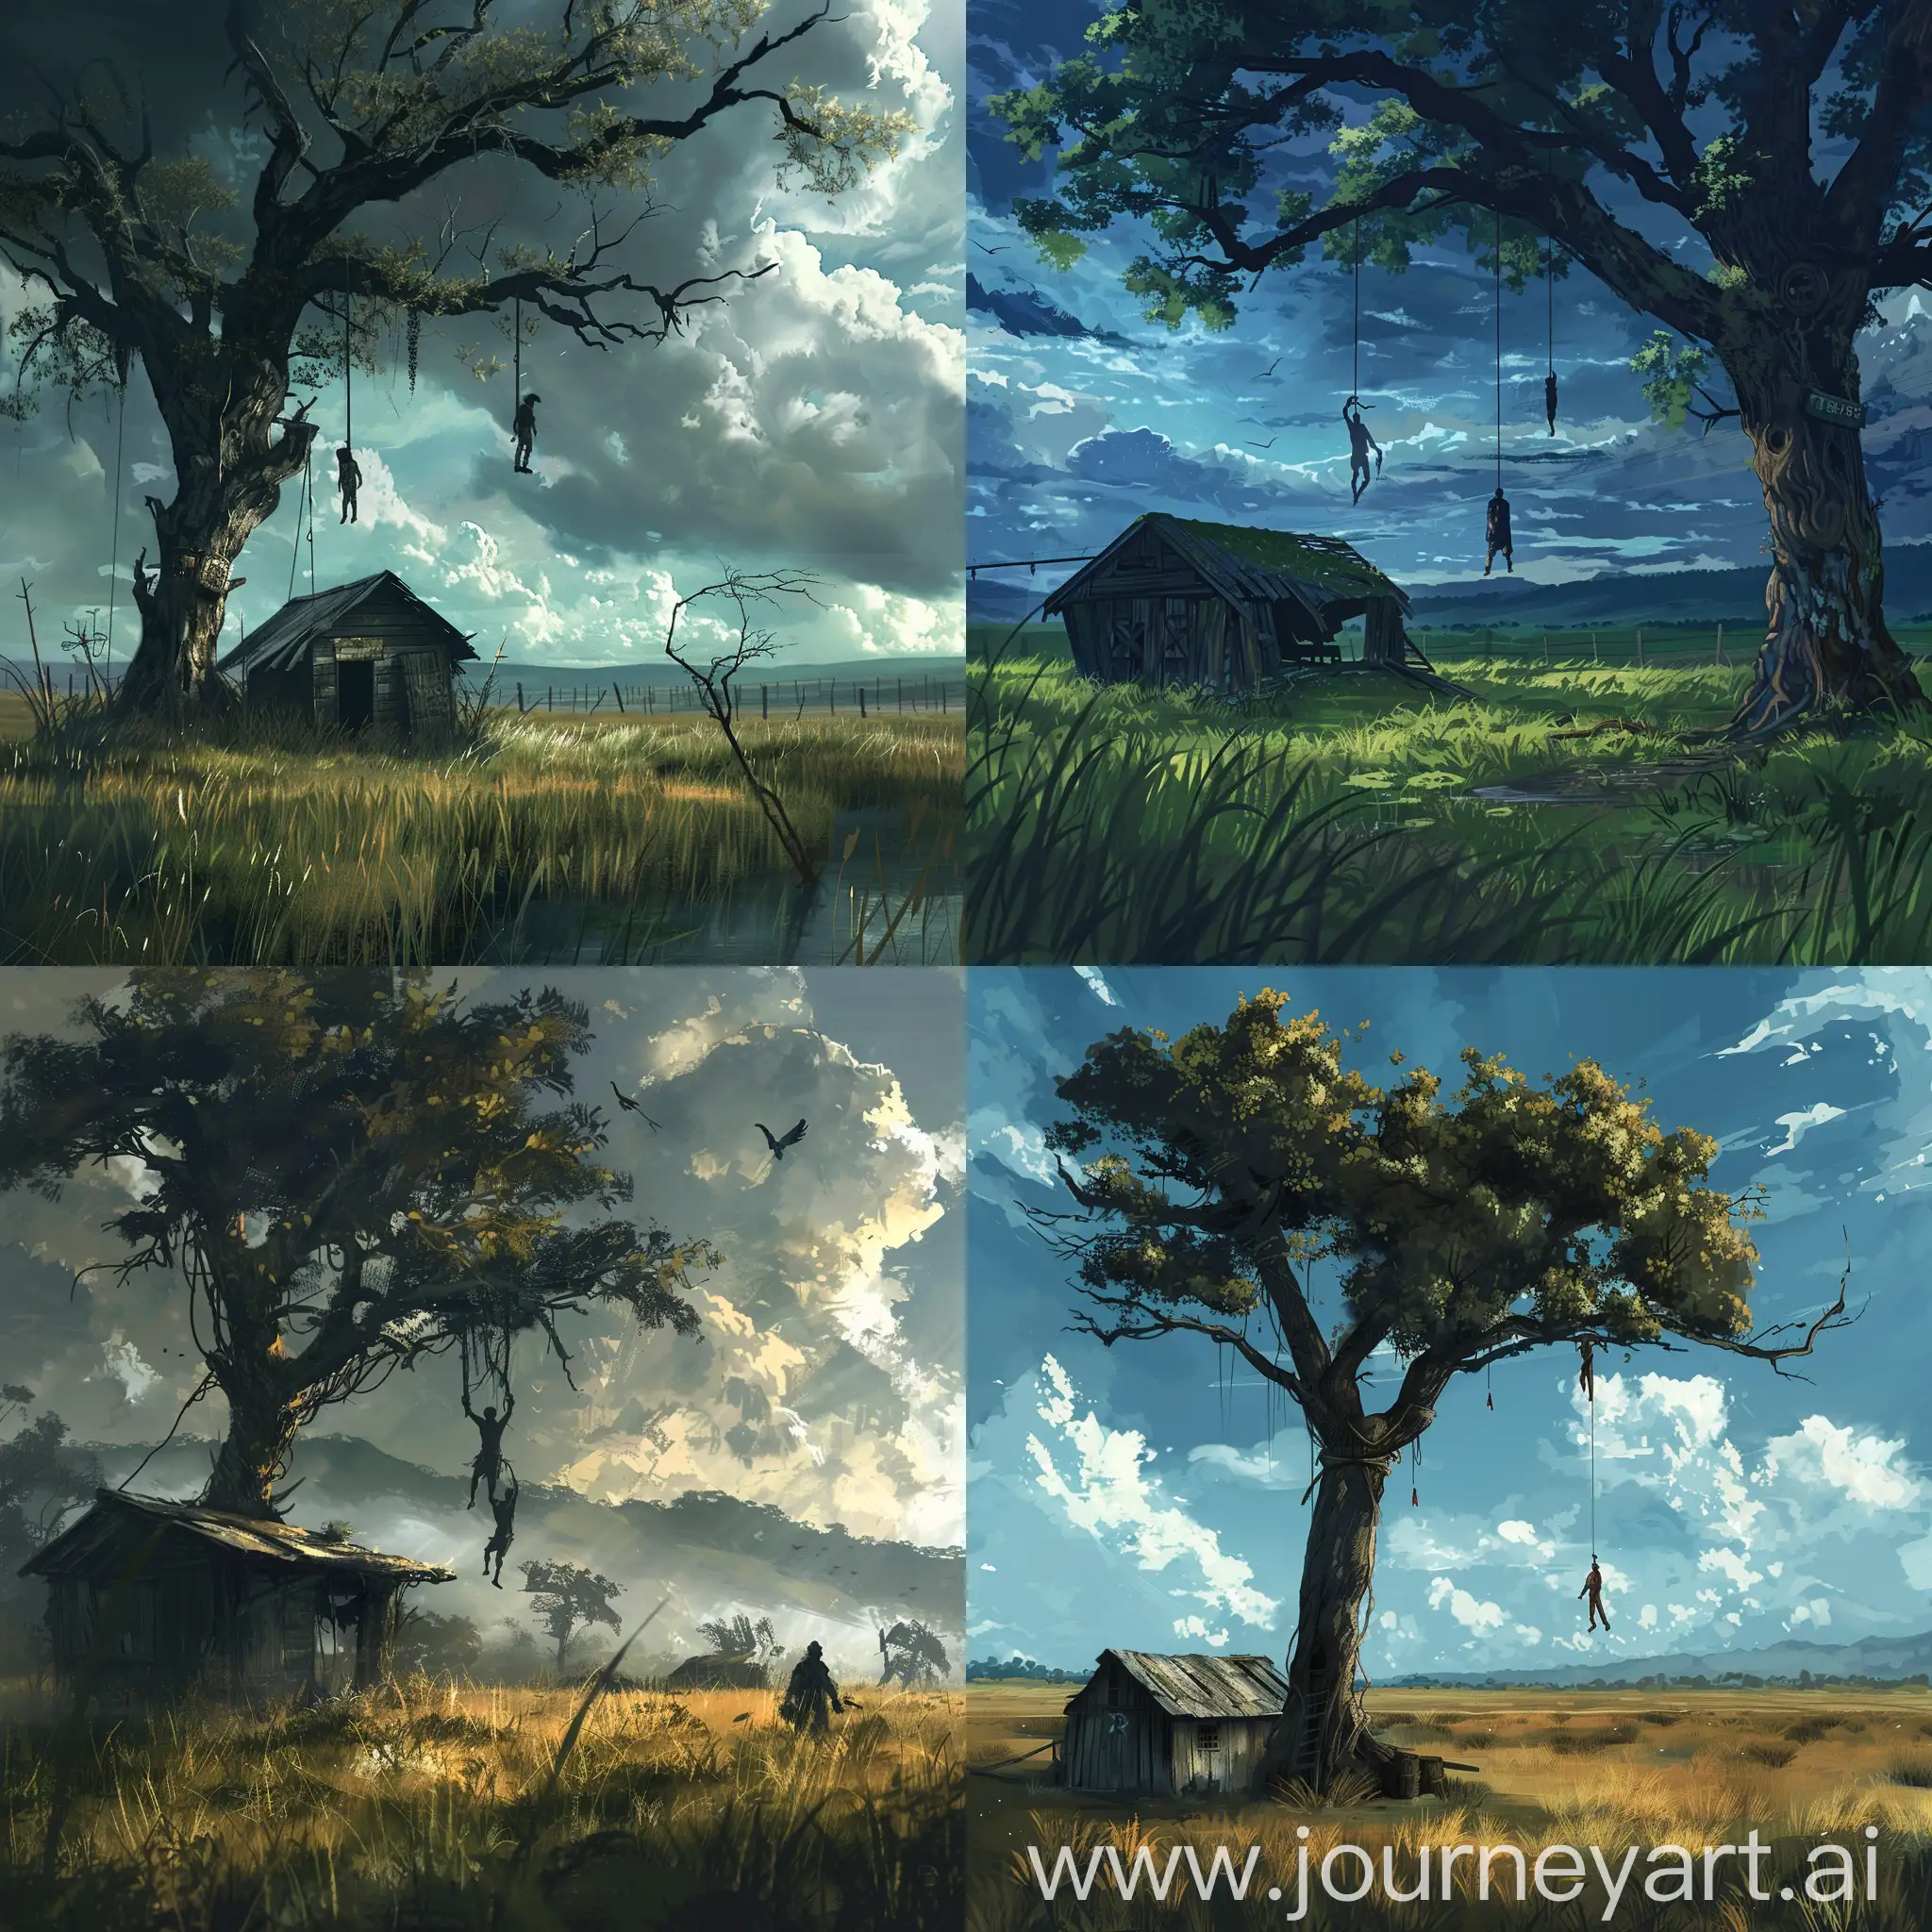 Can you make me a dark fantasy scene of grasslands with a shack and a tree with 2 people hanging from it?